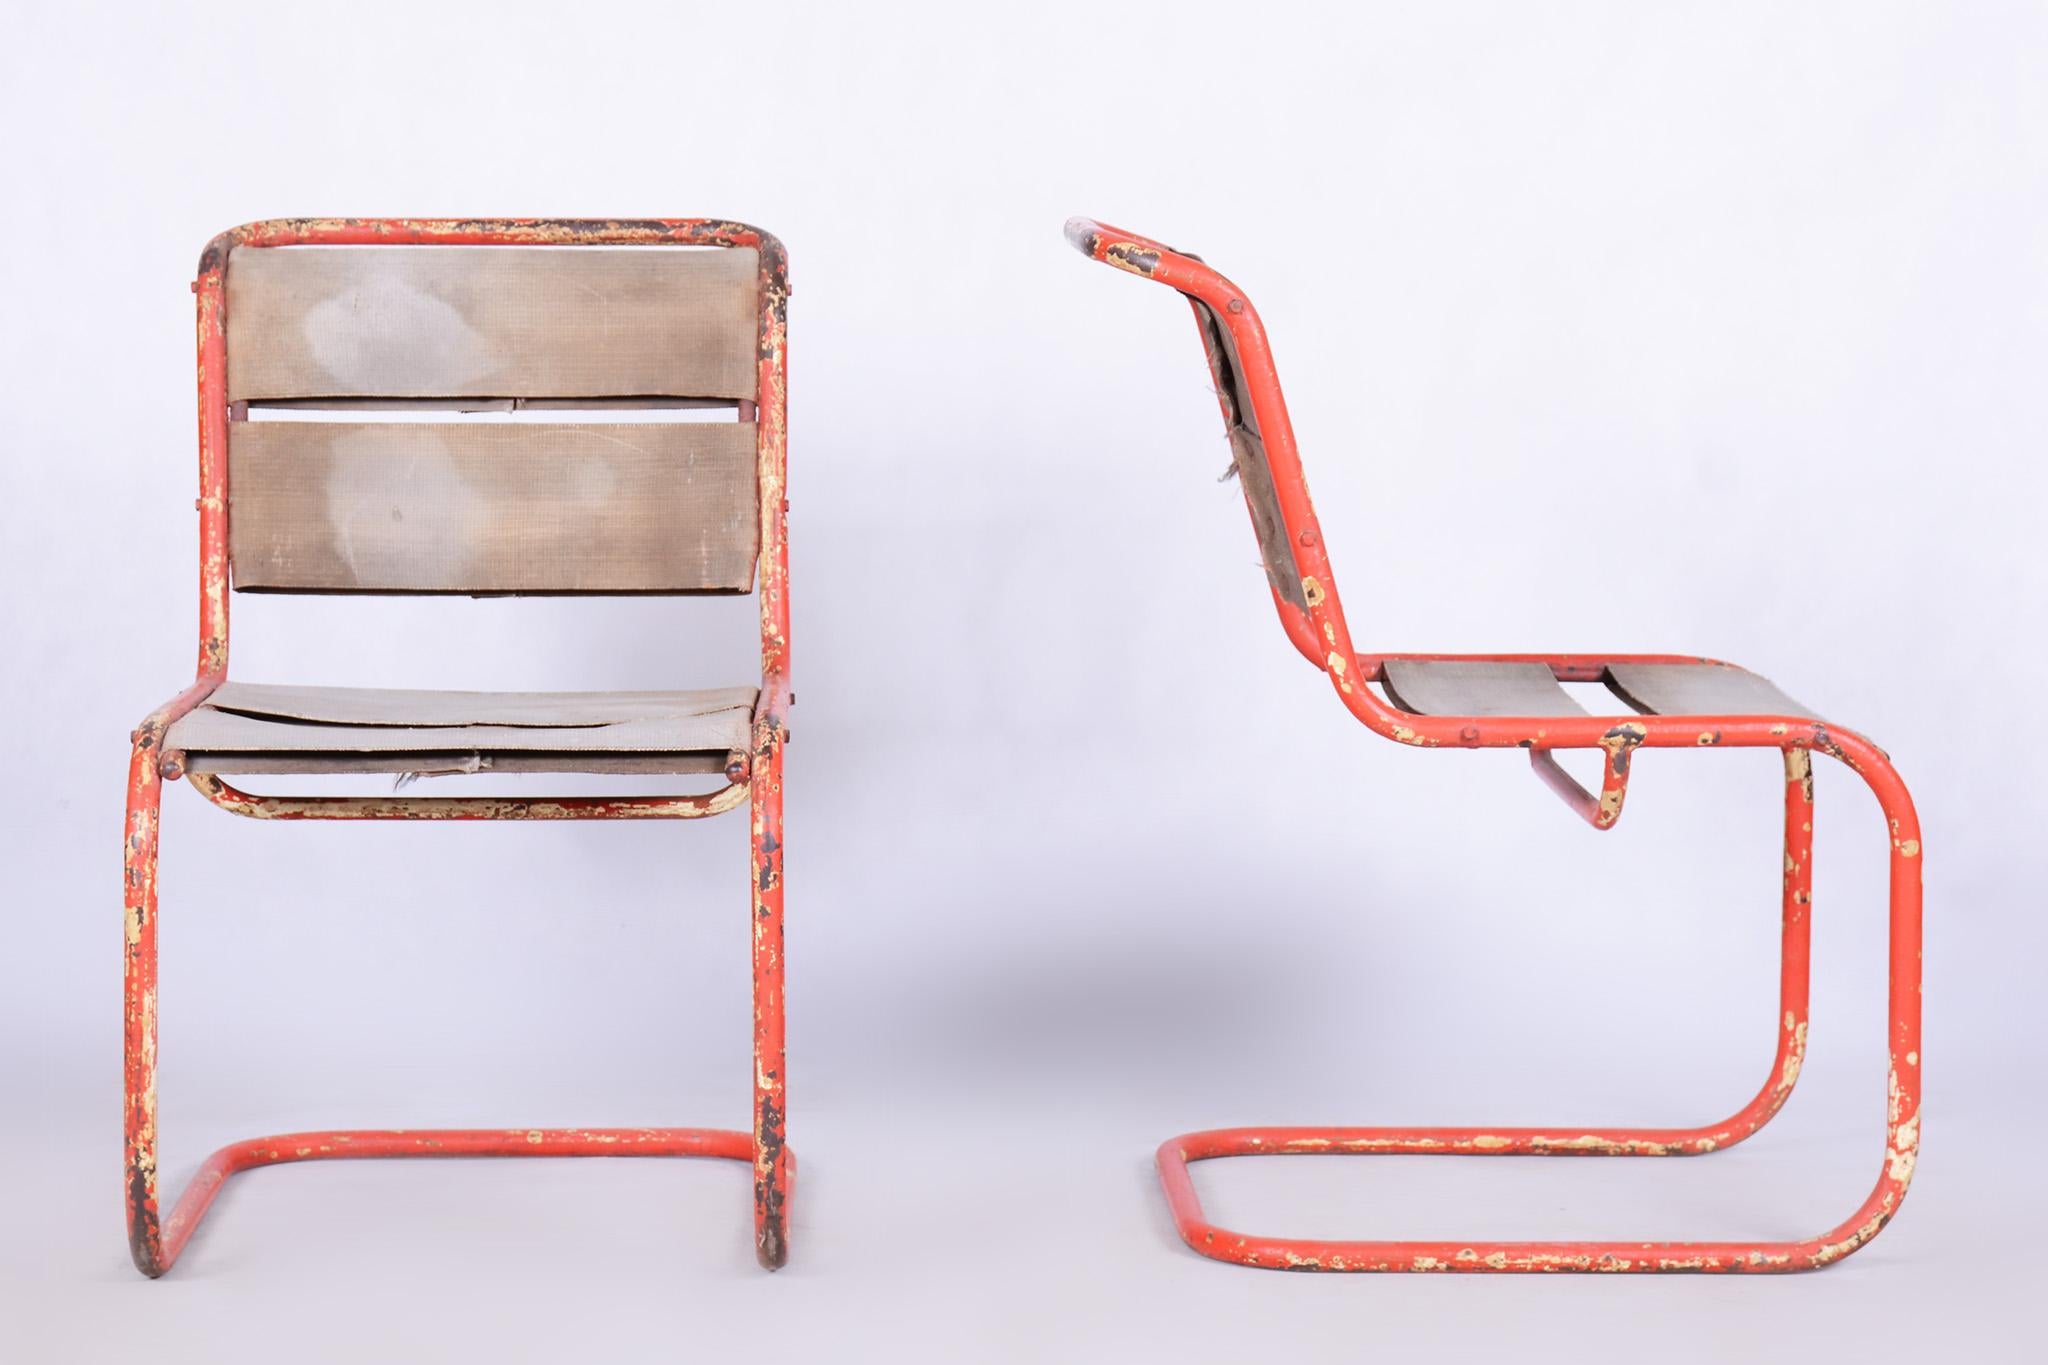 Original Pair of Chairs by Josef Gocar, Lacquered Steel, Czechia, 1930s For Sale 1